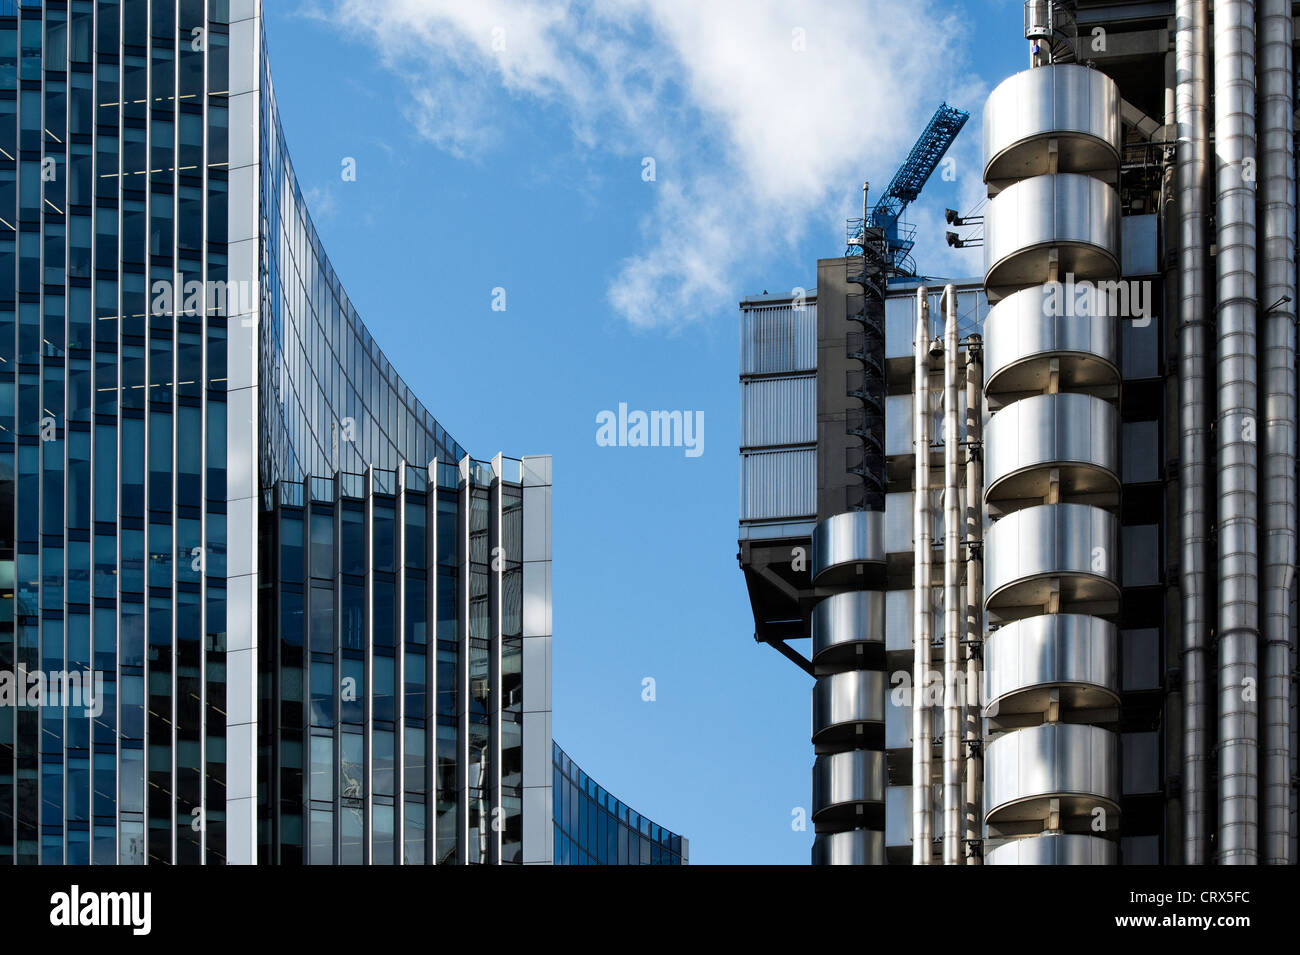 Willis building and Lloyds building. Lime Street. London, England Stock Photo